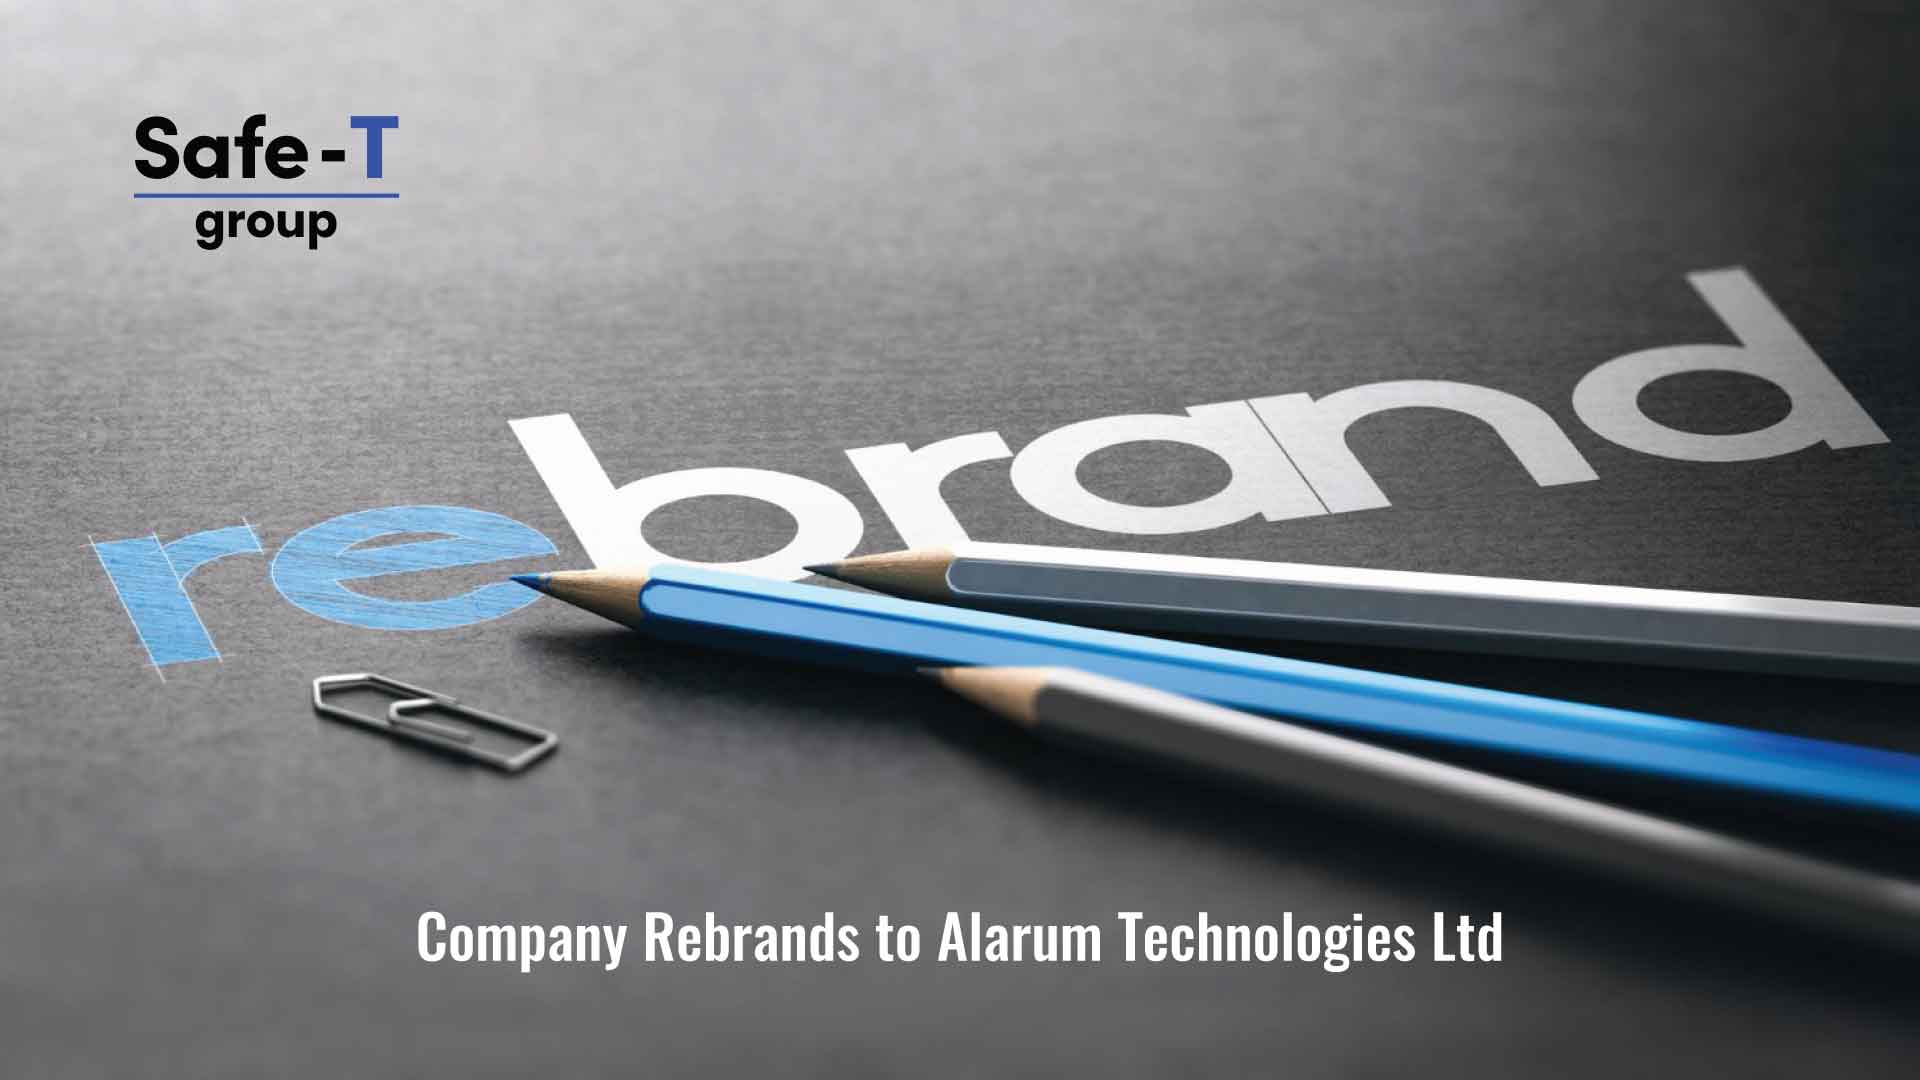 Safe-T Group Announces Corporate Rebranding Changes Name to Alarum Technologies Ltd. to Reflect Core Values of its Growing Business